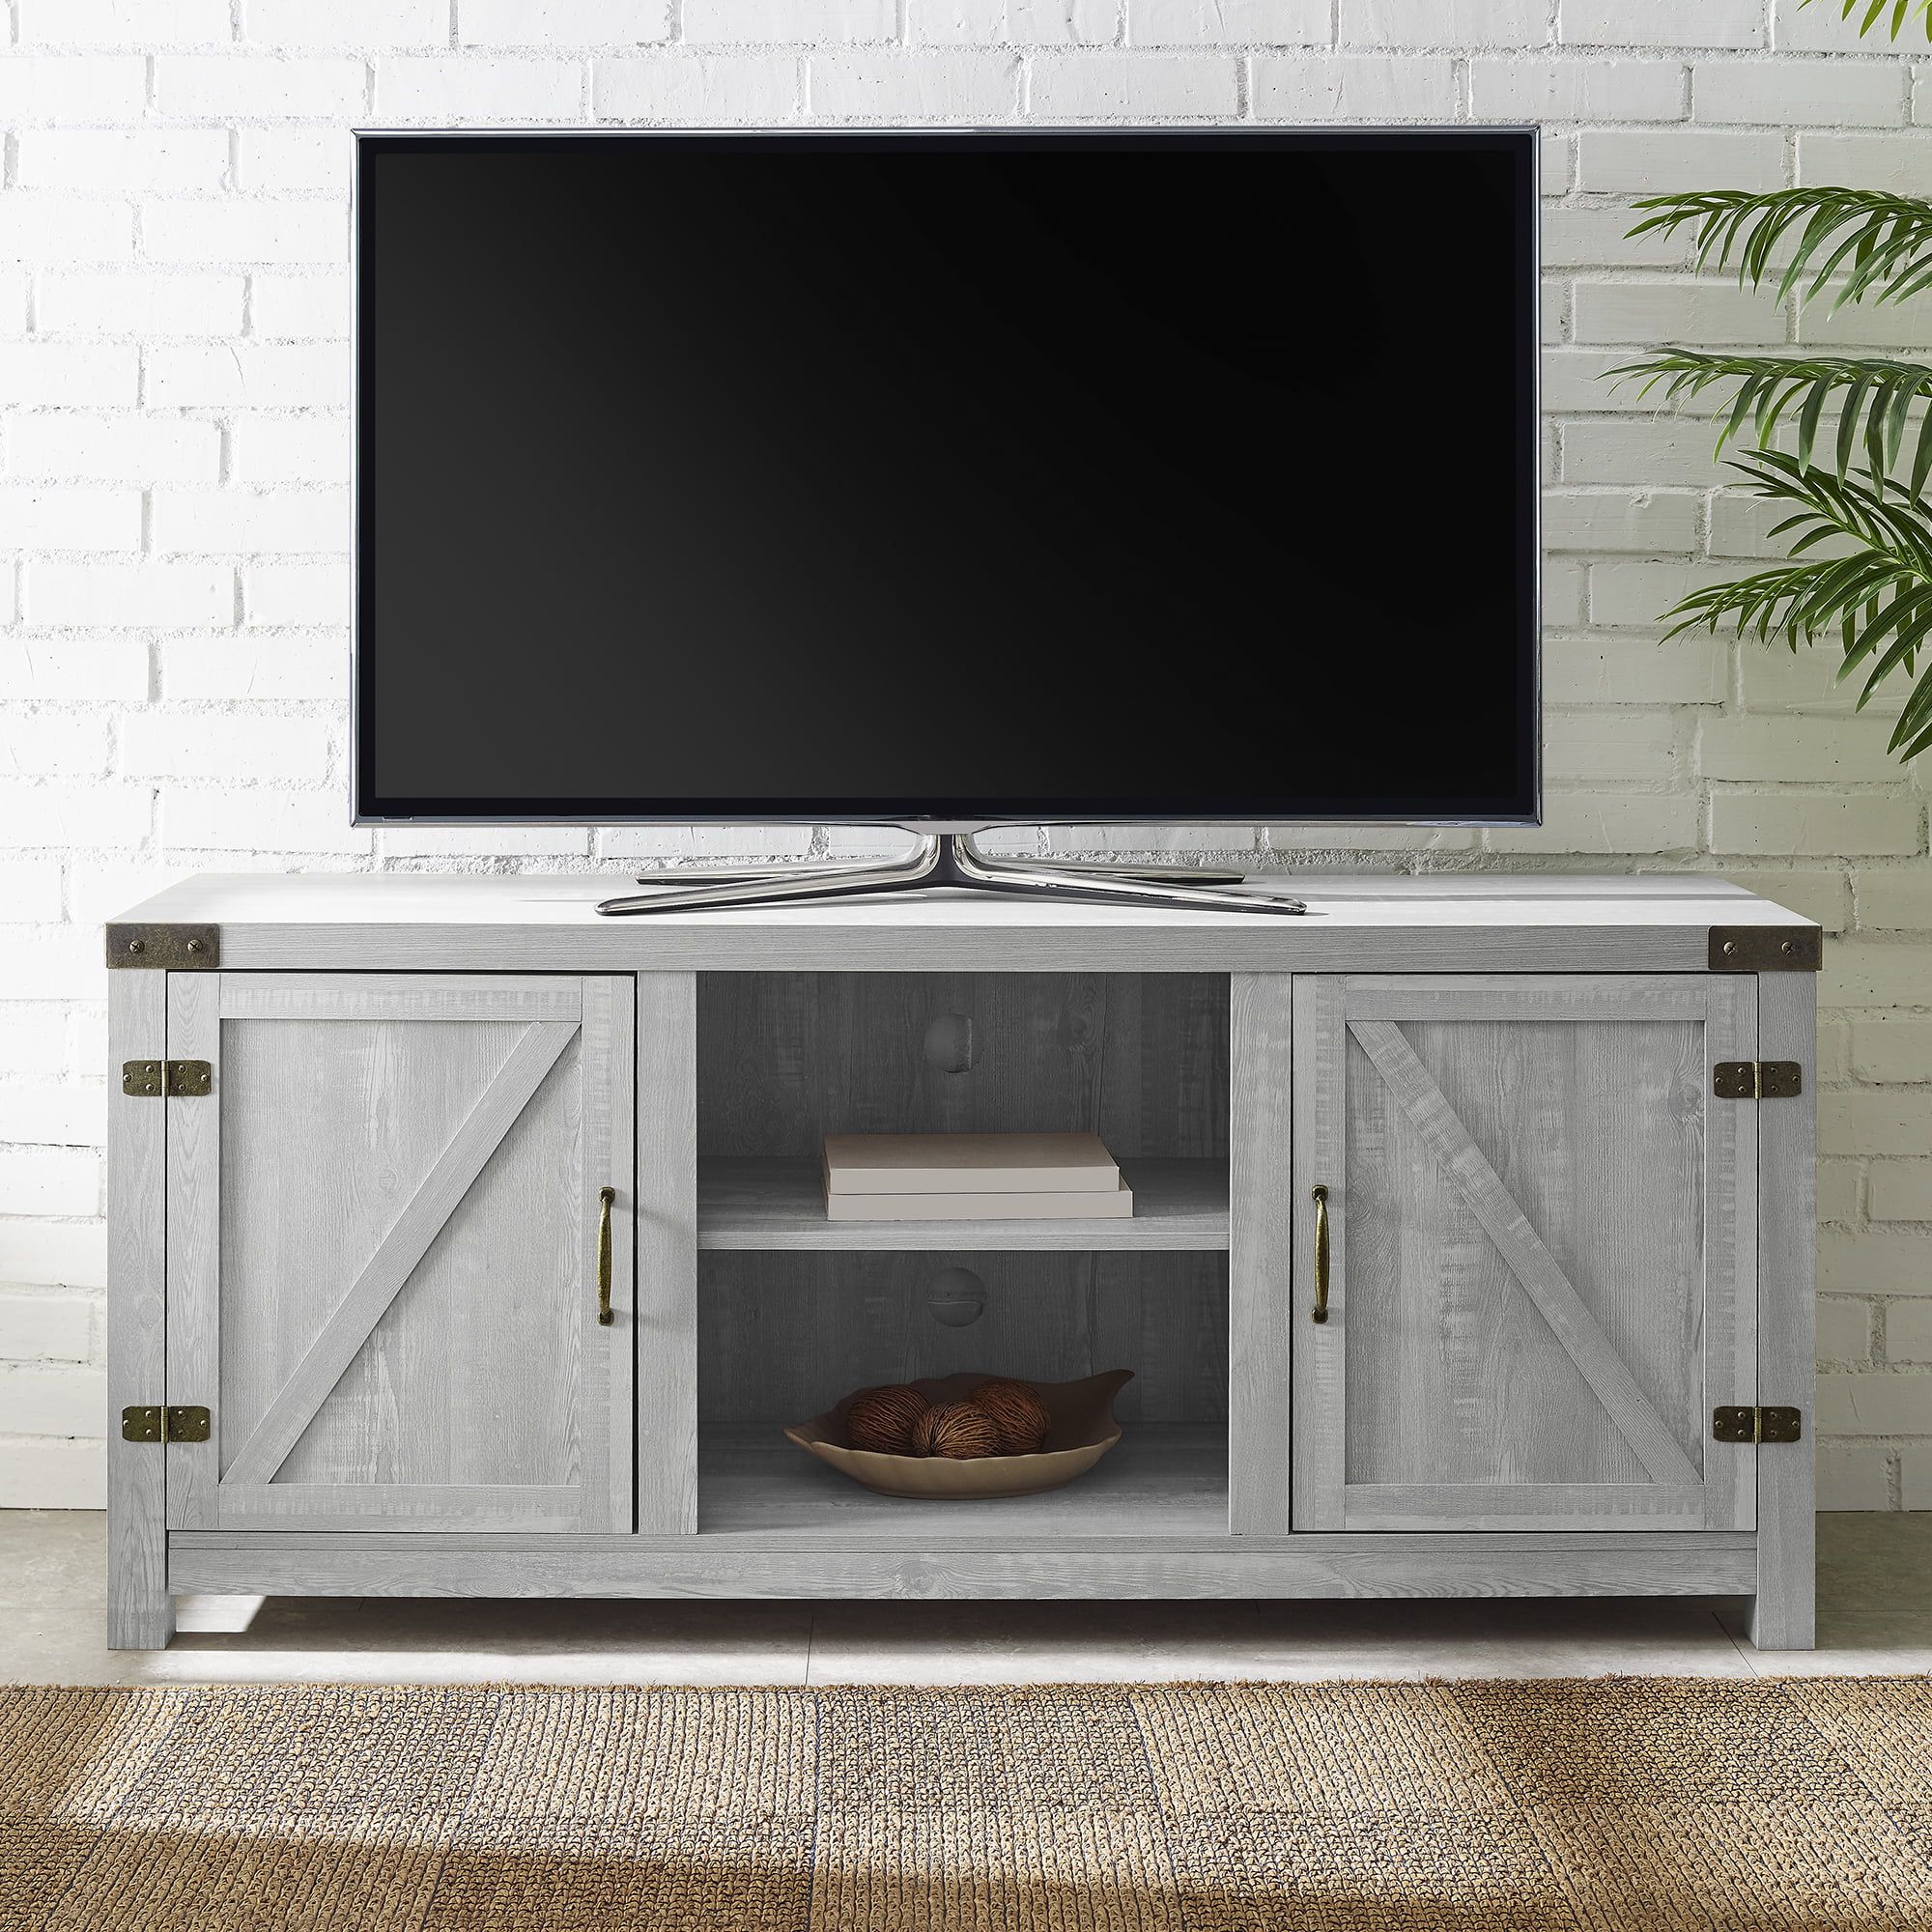 Most Popular Farmhouse Stands For Tvs Throughout Woven Paths Modern Farmhouse Barn Door Tv Stand For Tvs Up To 65 (Photo 14 of 15)